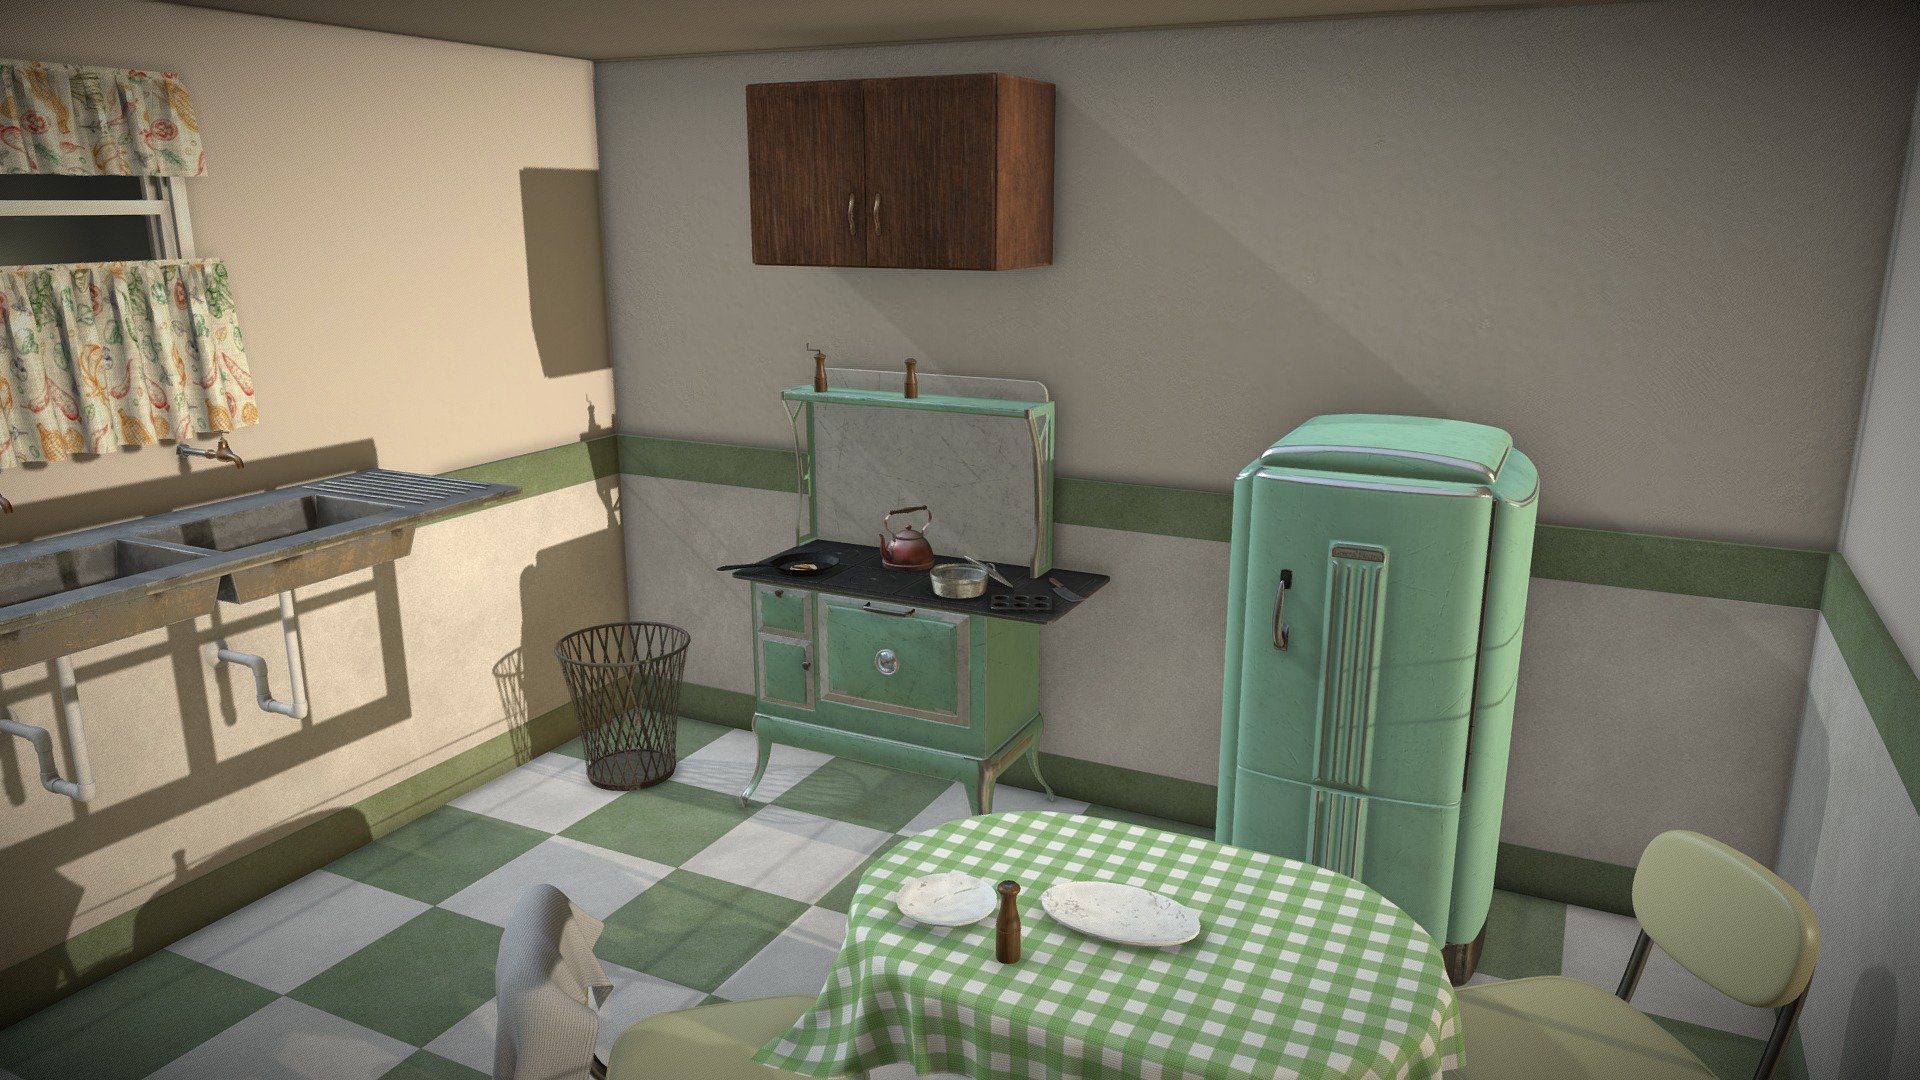 A Vintage Kitchen Design, i got very sick while i was working on it, so it might not look as good as i wanted. 

Programs: Maya + Marvelous Designer + Substance Painter 

Hope you like it. 

Jakoza - Vintage Kitchen - 3D model by Jakoza (@Moe.T) 3d model